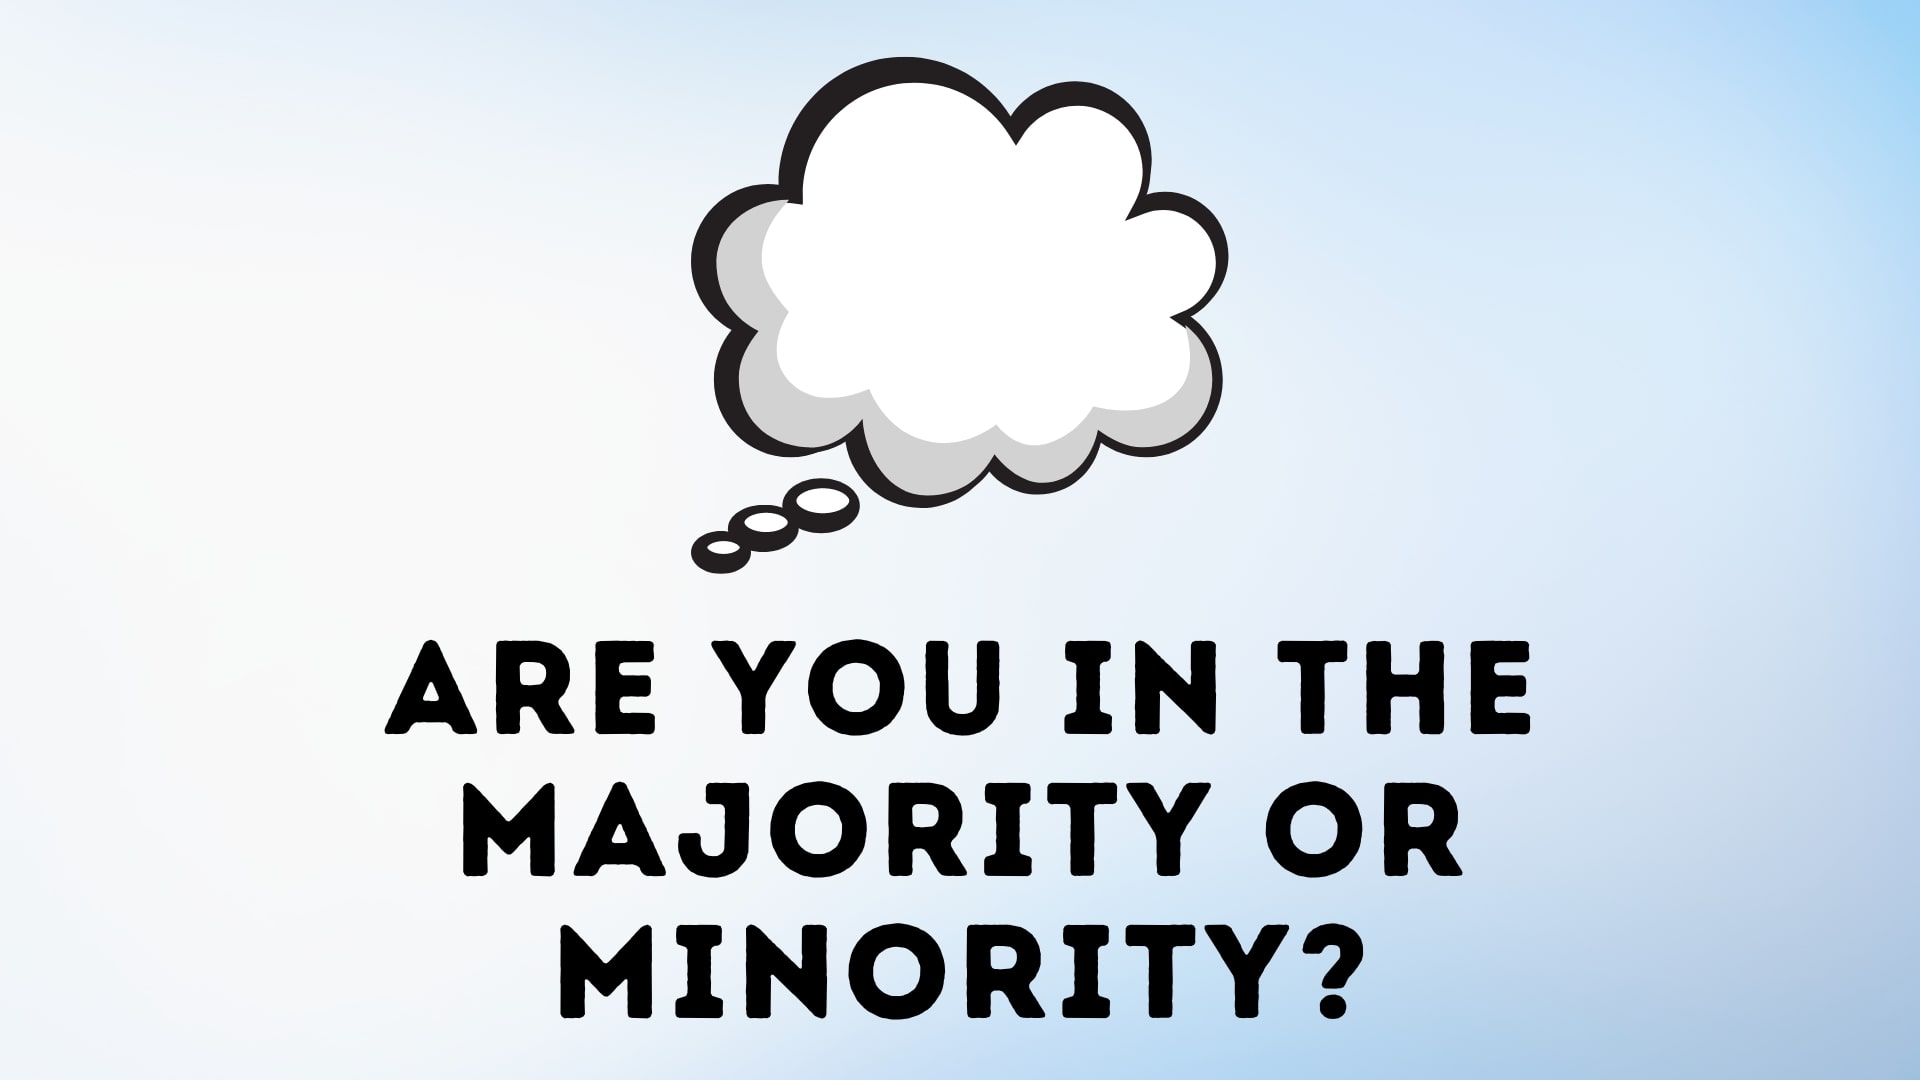 Are You in the Majority or Minority?